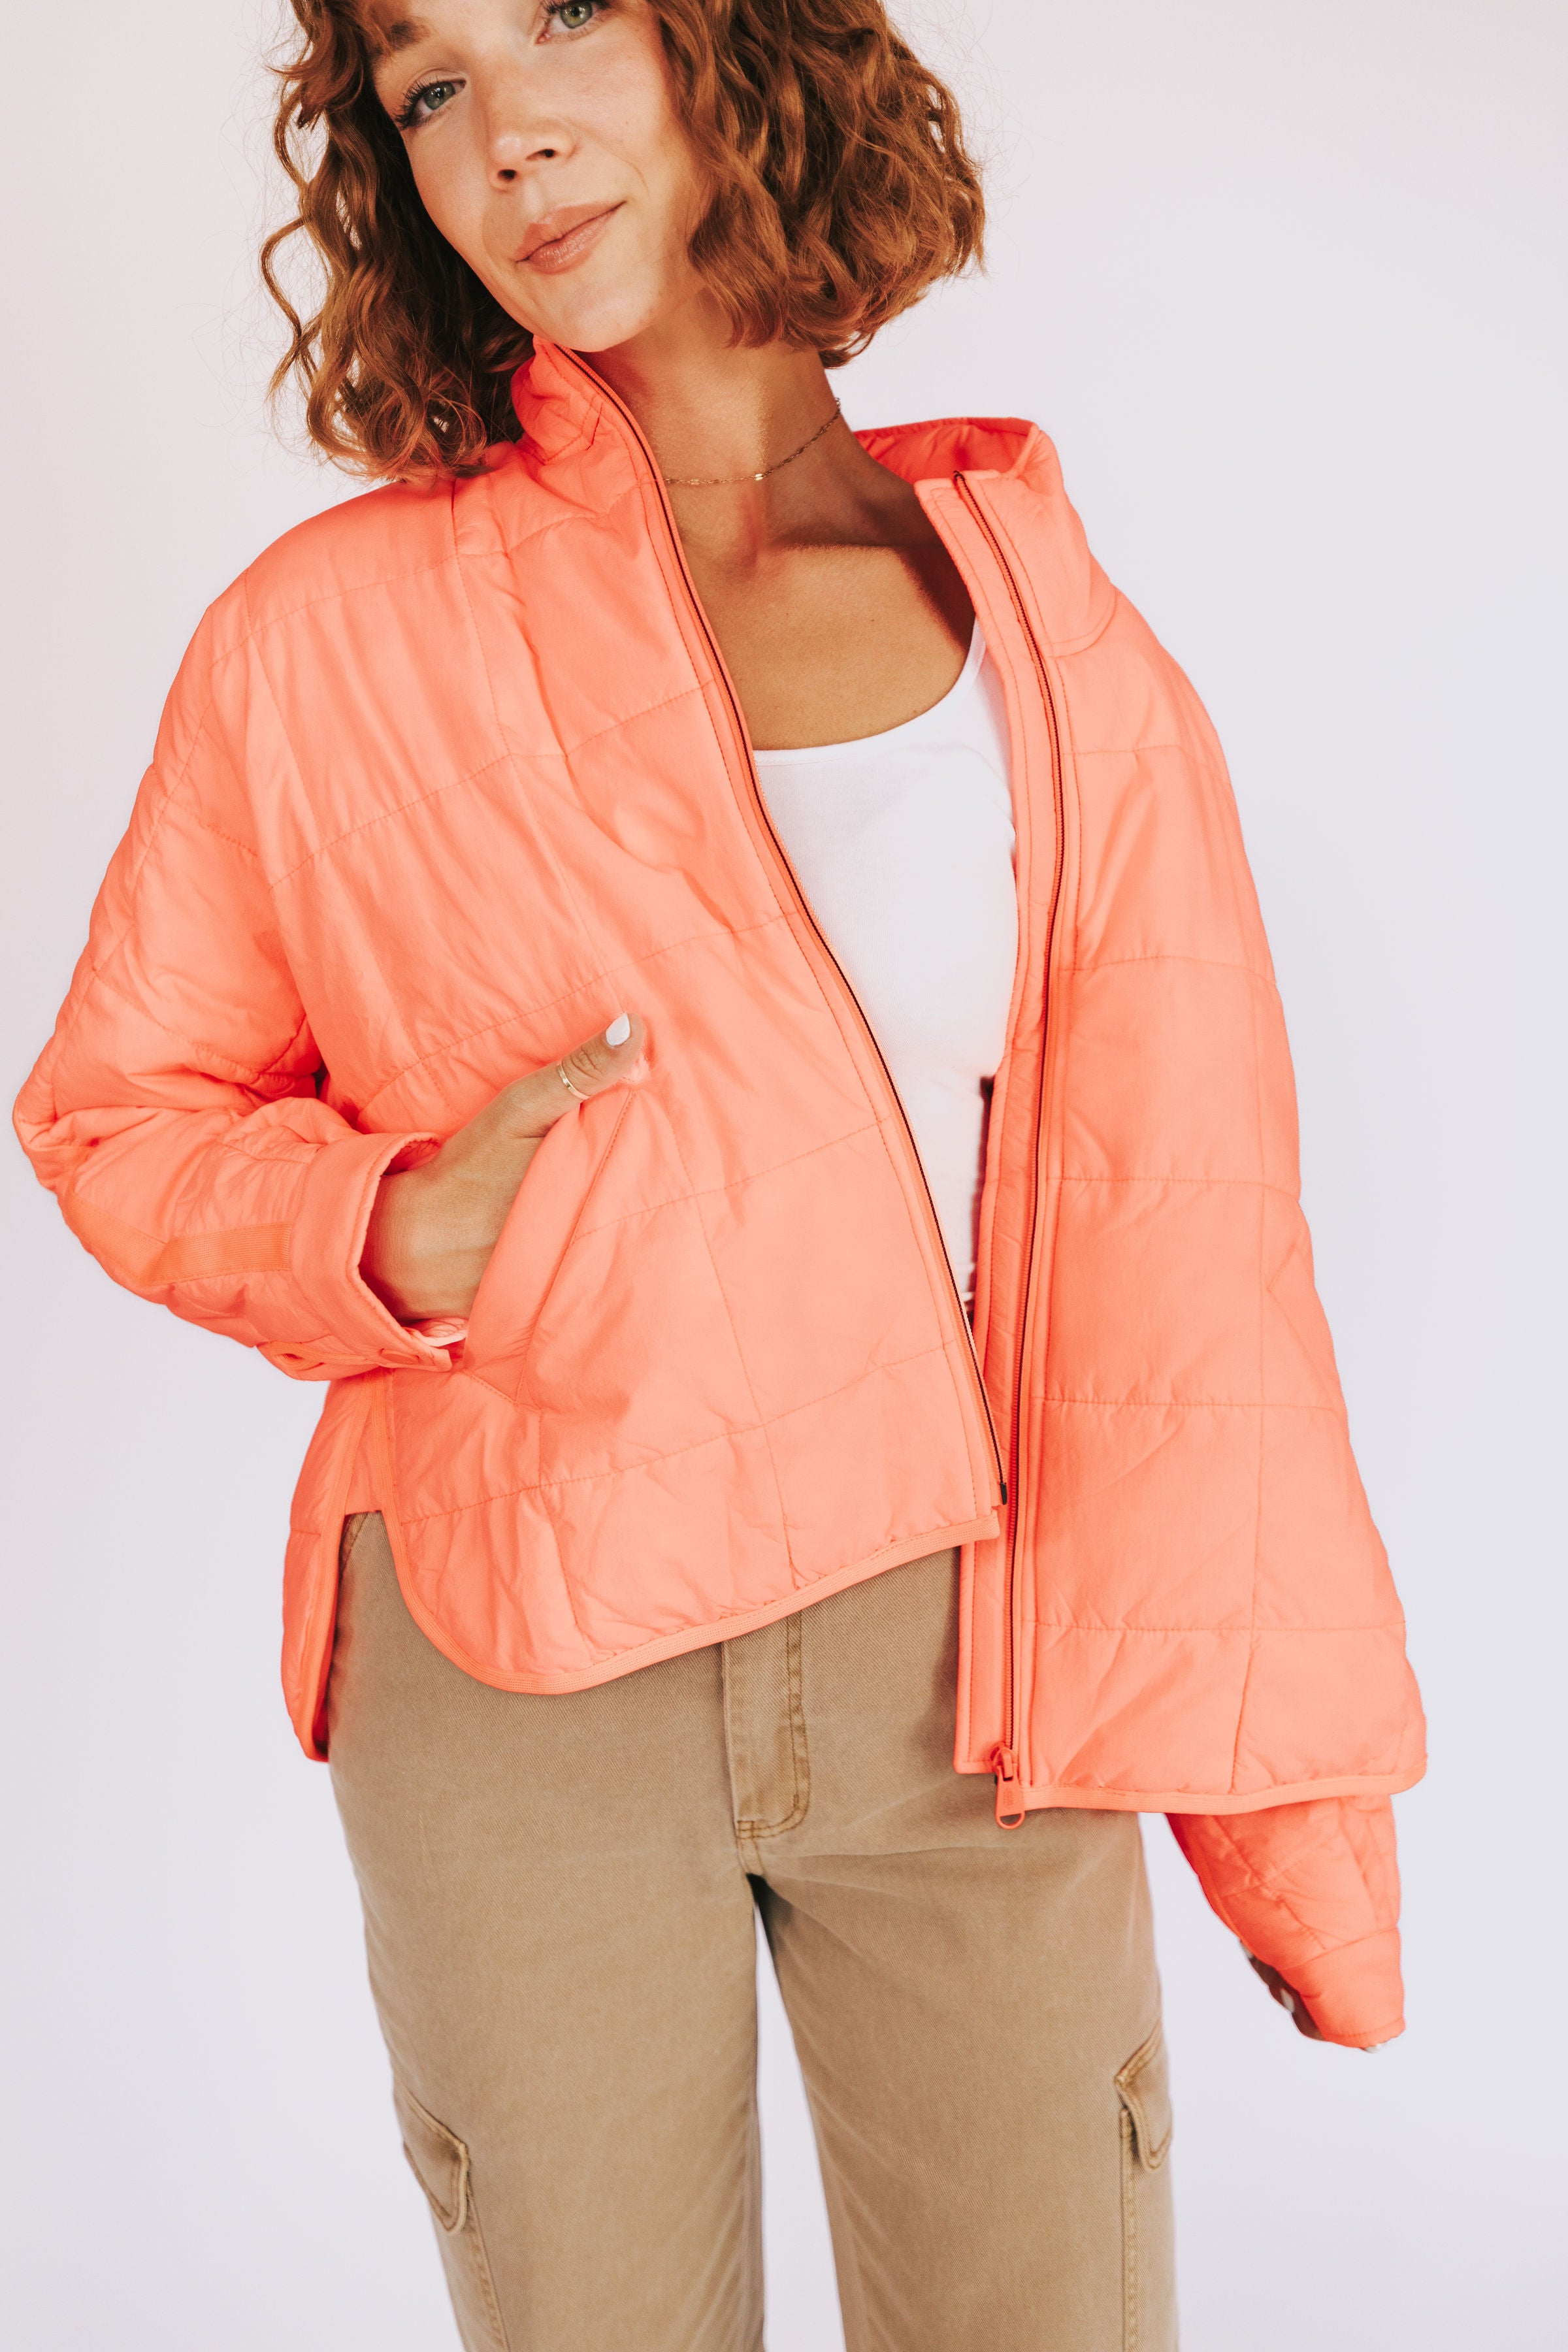 FREE PEOPLE - Pippa Packable Puffer Jacket